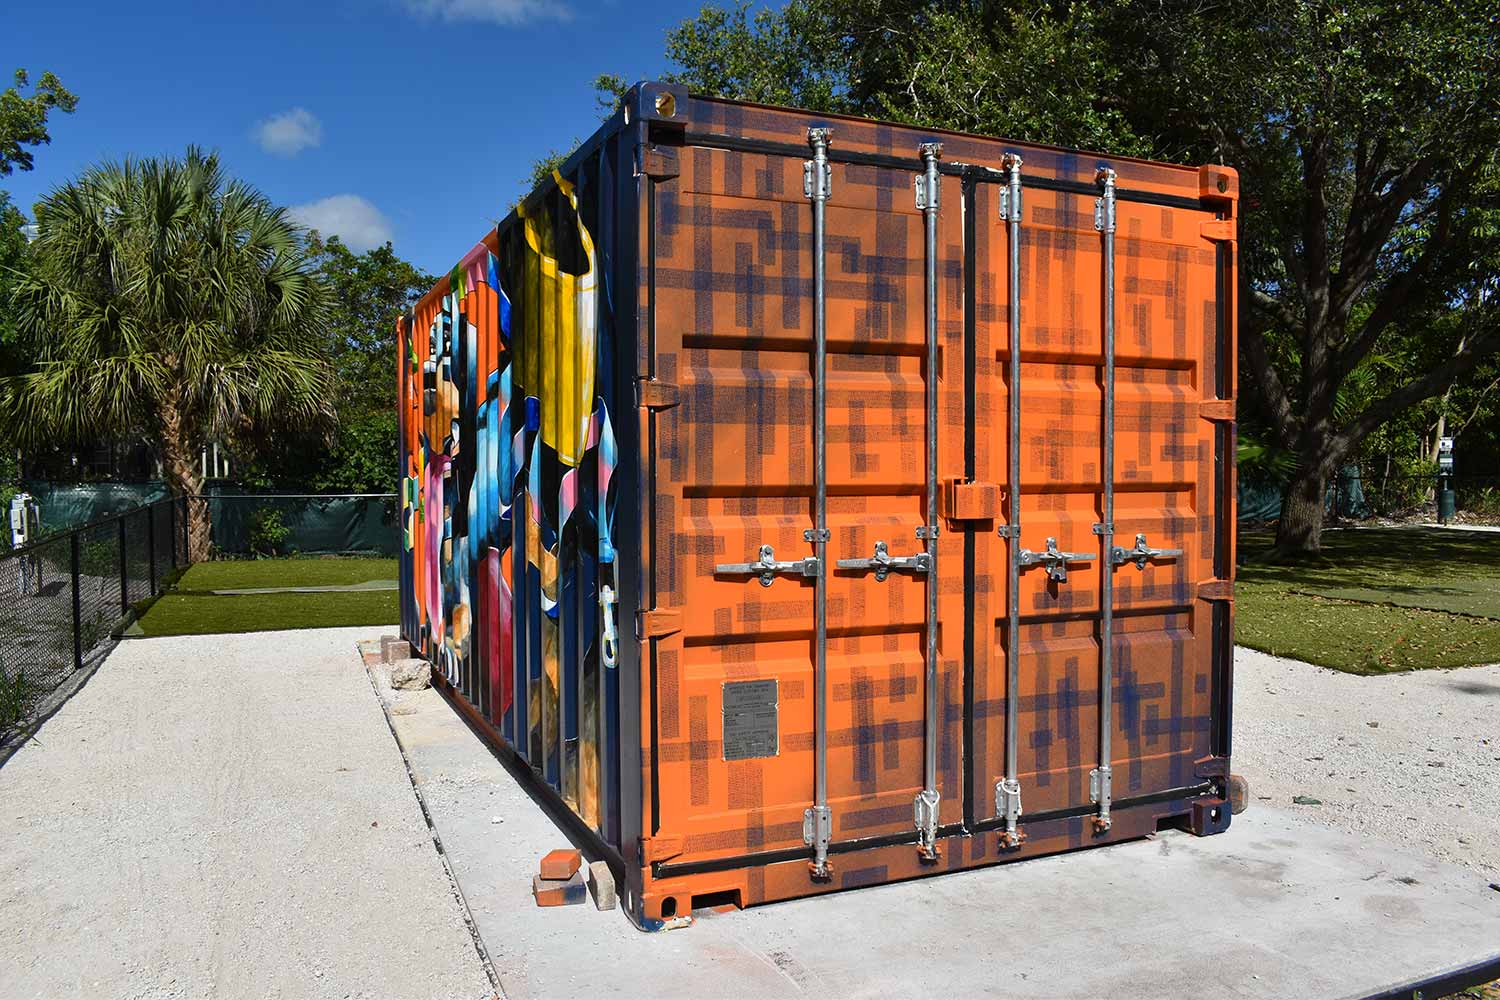 Abstract Art Mural on Shipping Container